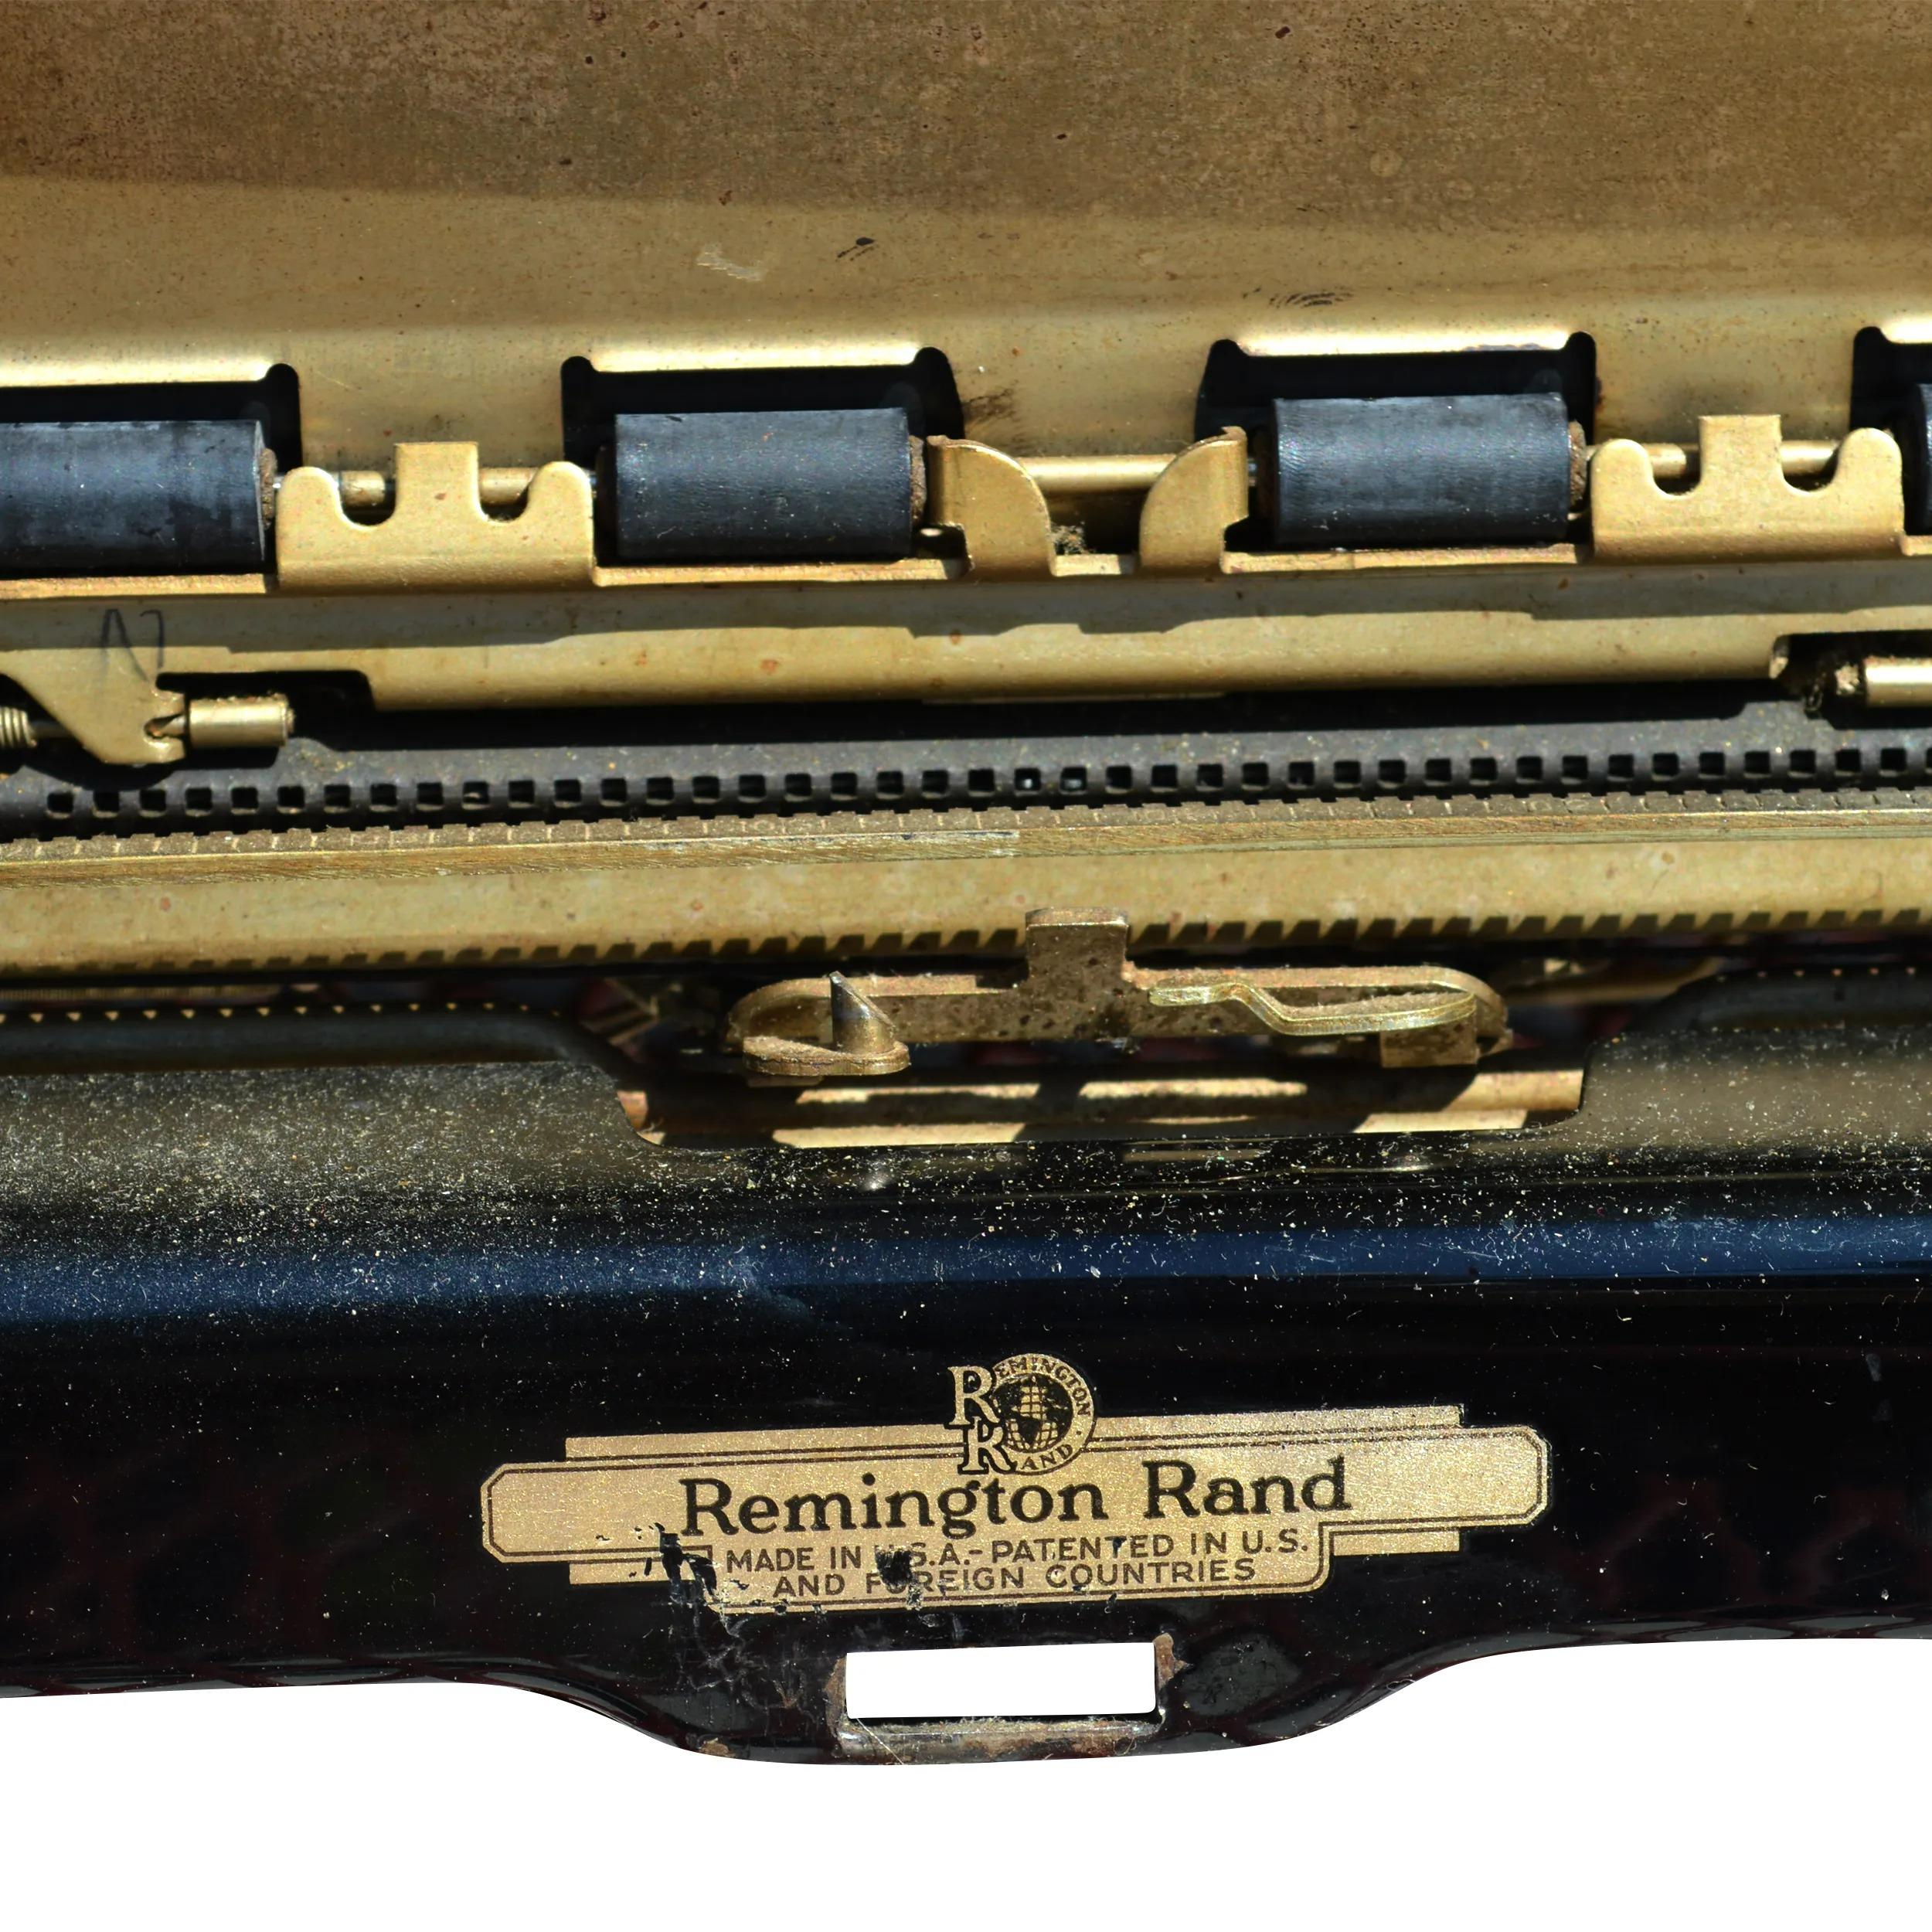 Vintage Remington Rand Model 5 Typewriter with Portable Carrying Case In Fair Condition For Sale In Pasadena, TX